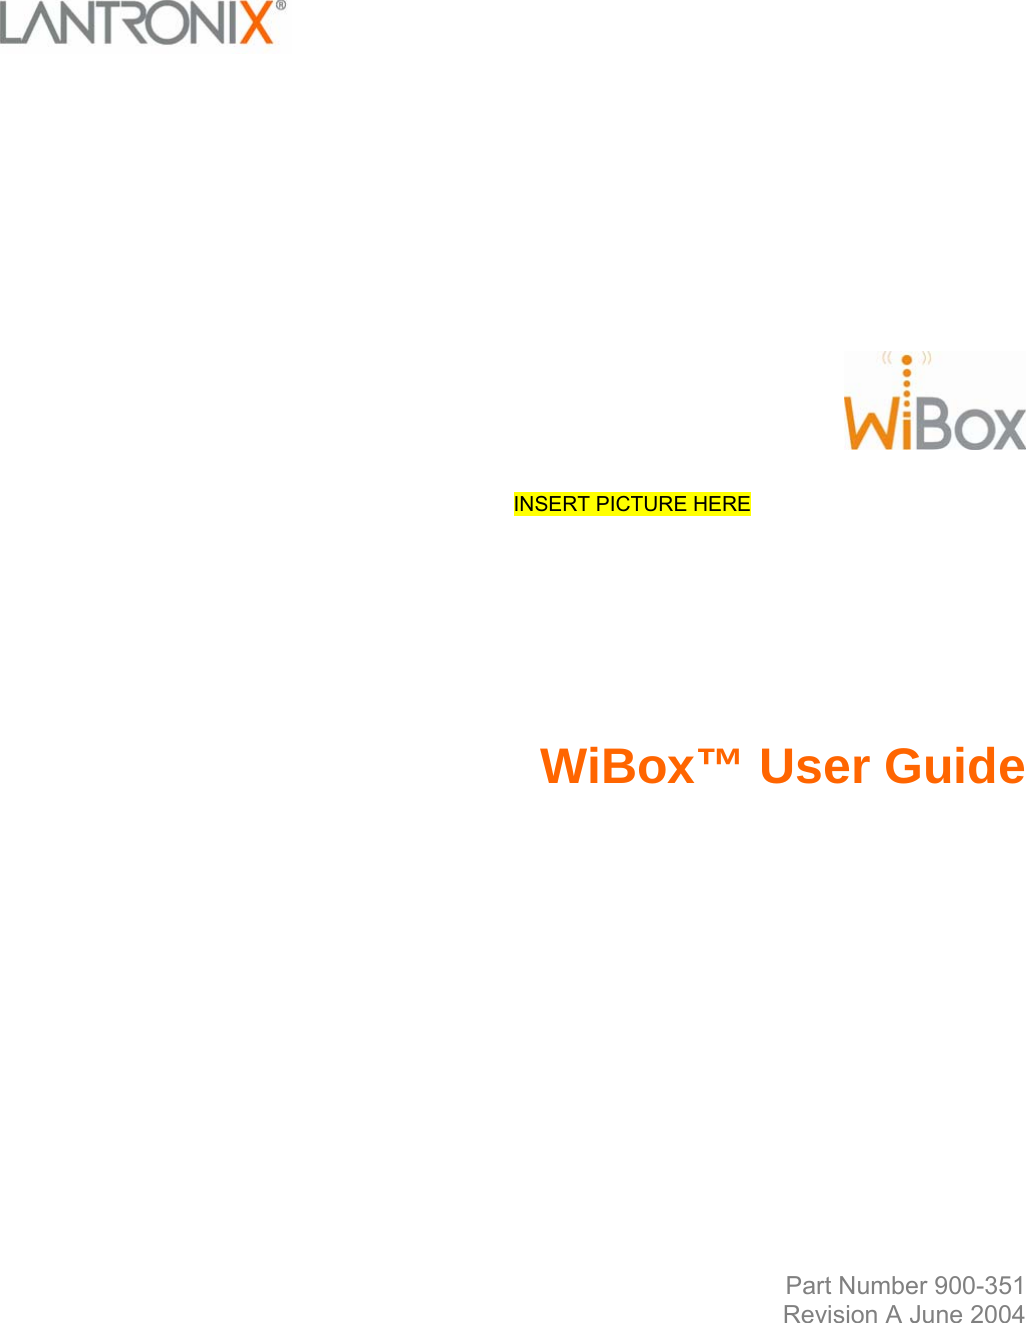                     INSERT PICTURE HERE     WiBox™ User Guide               Part Number 900-351 Revision A June 2004